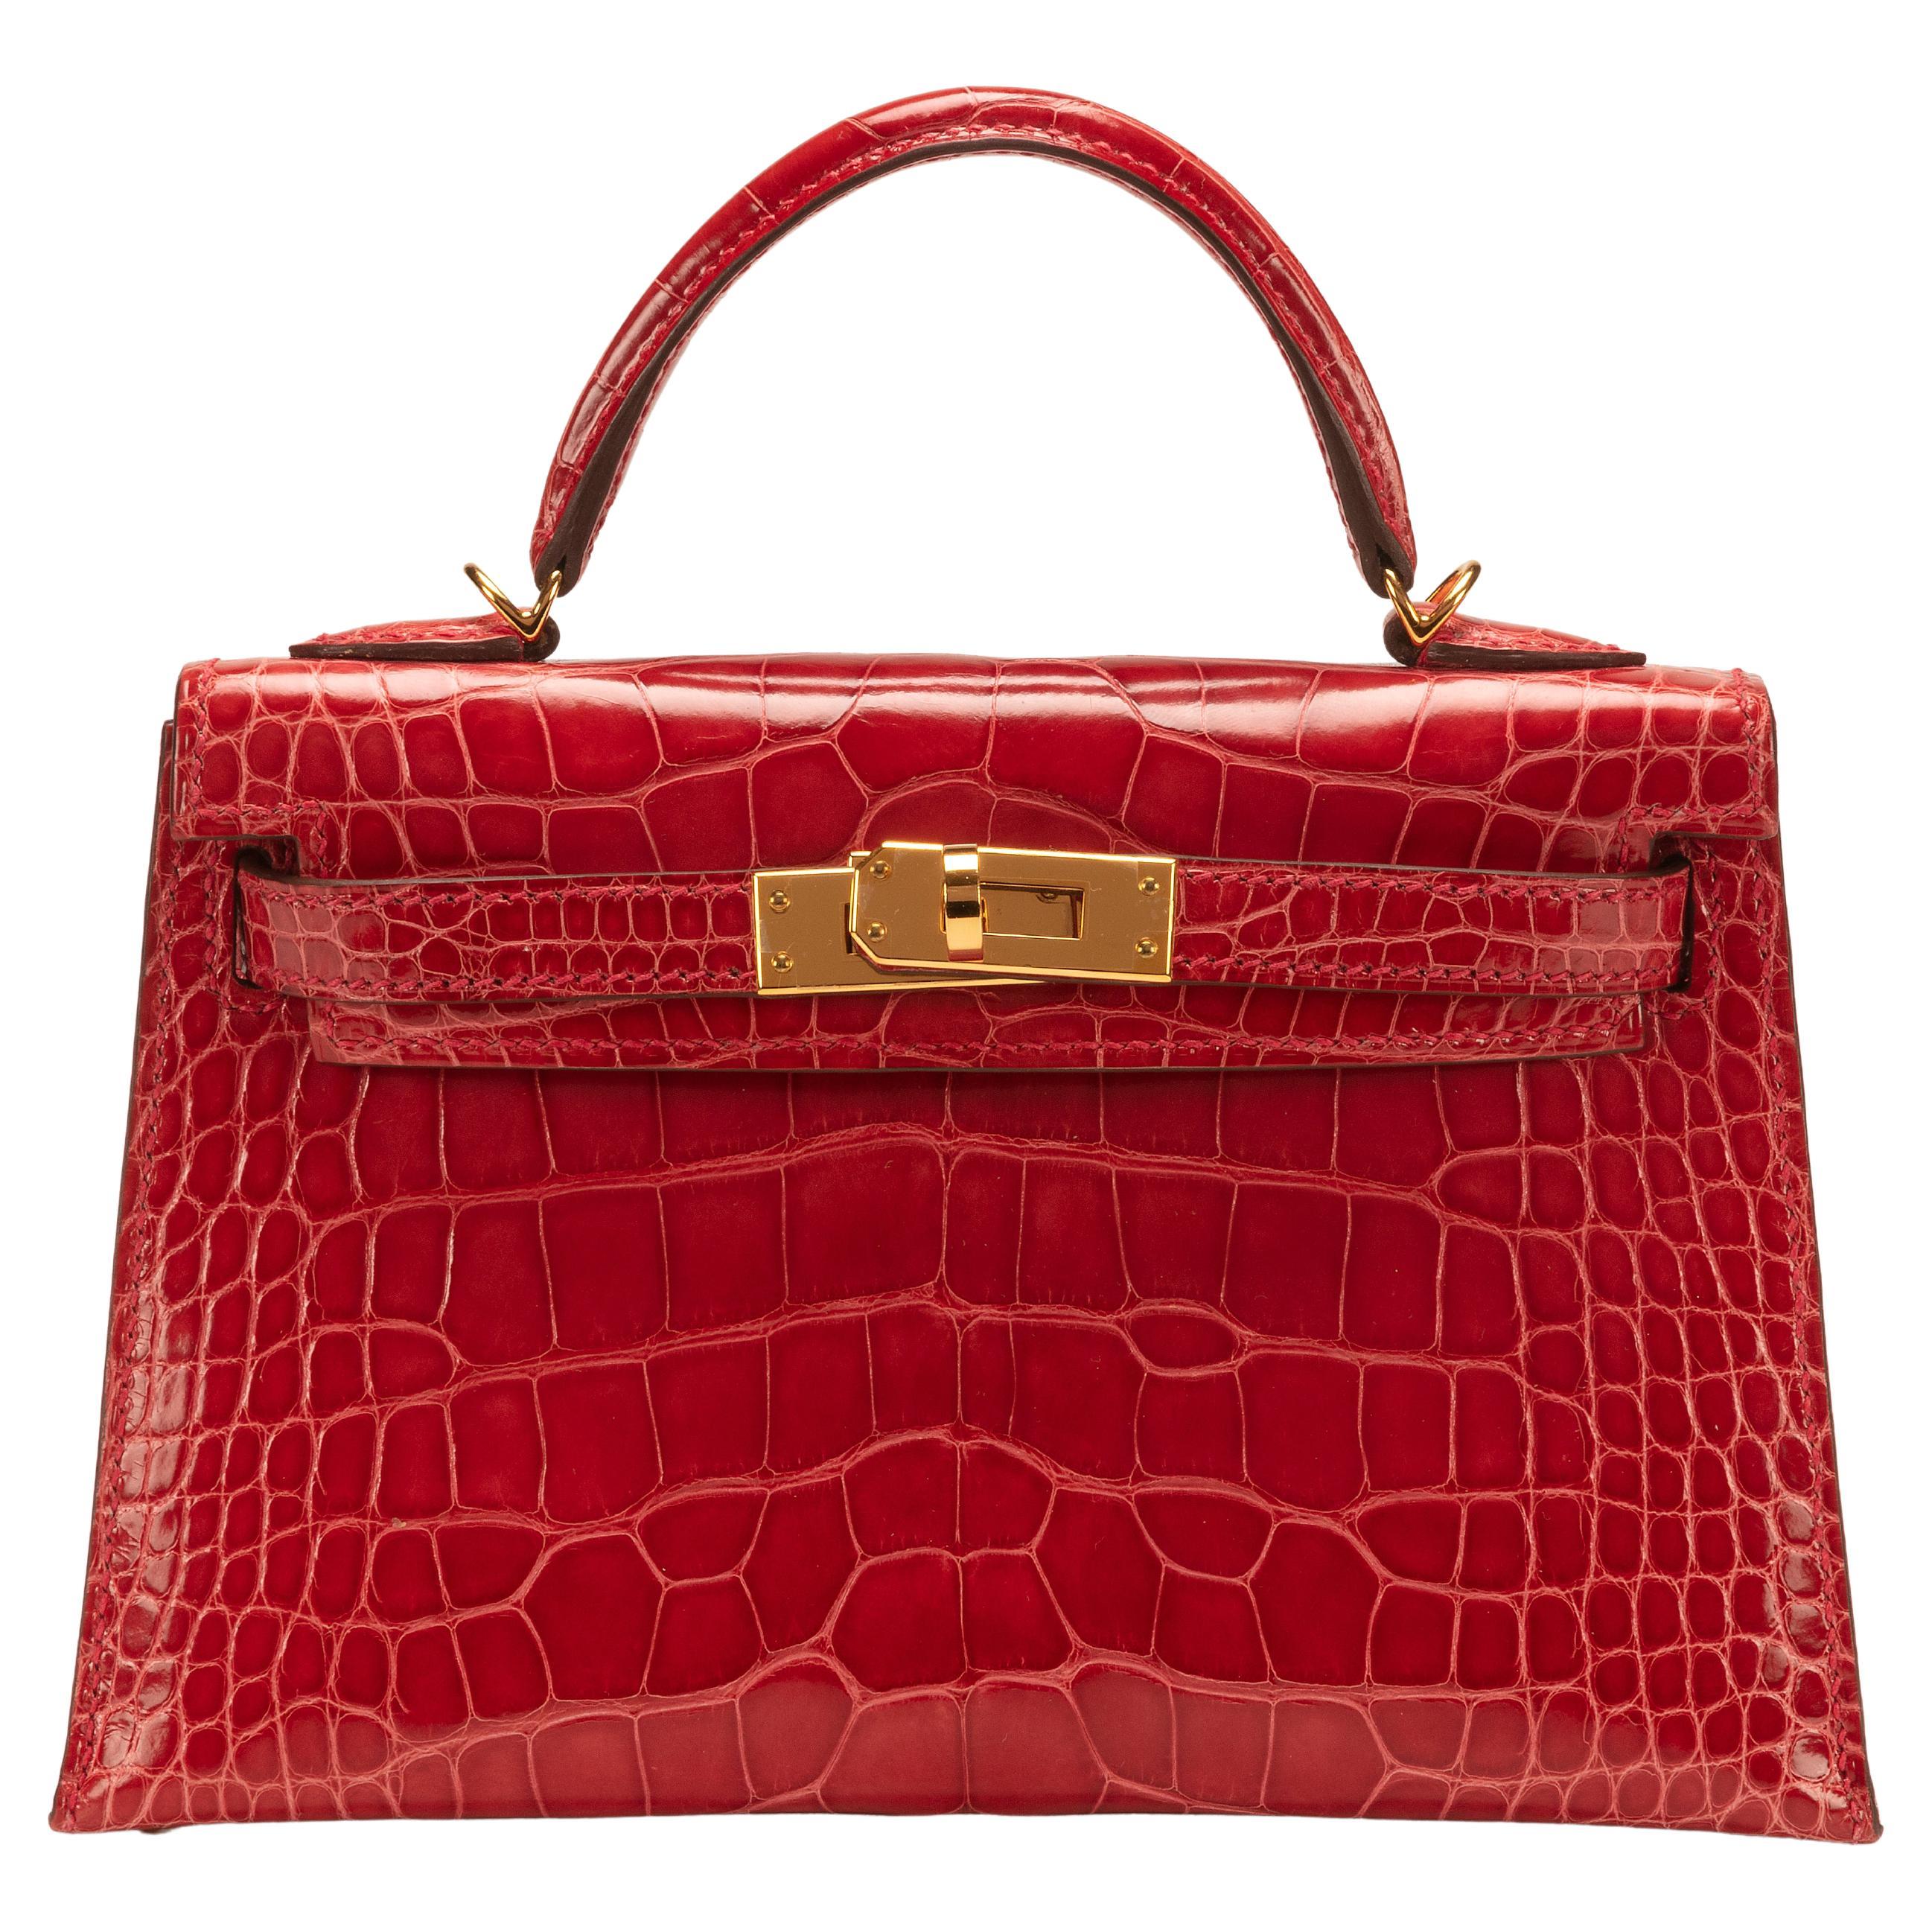 BUYING ANOTHER EXOTIC HERMÈS KELLY? 